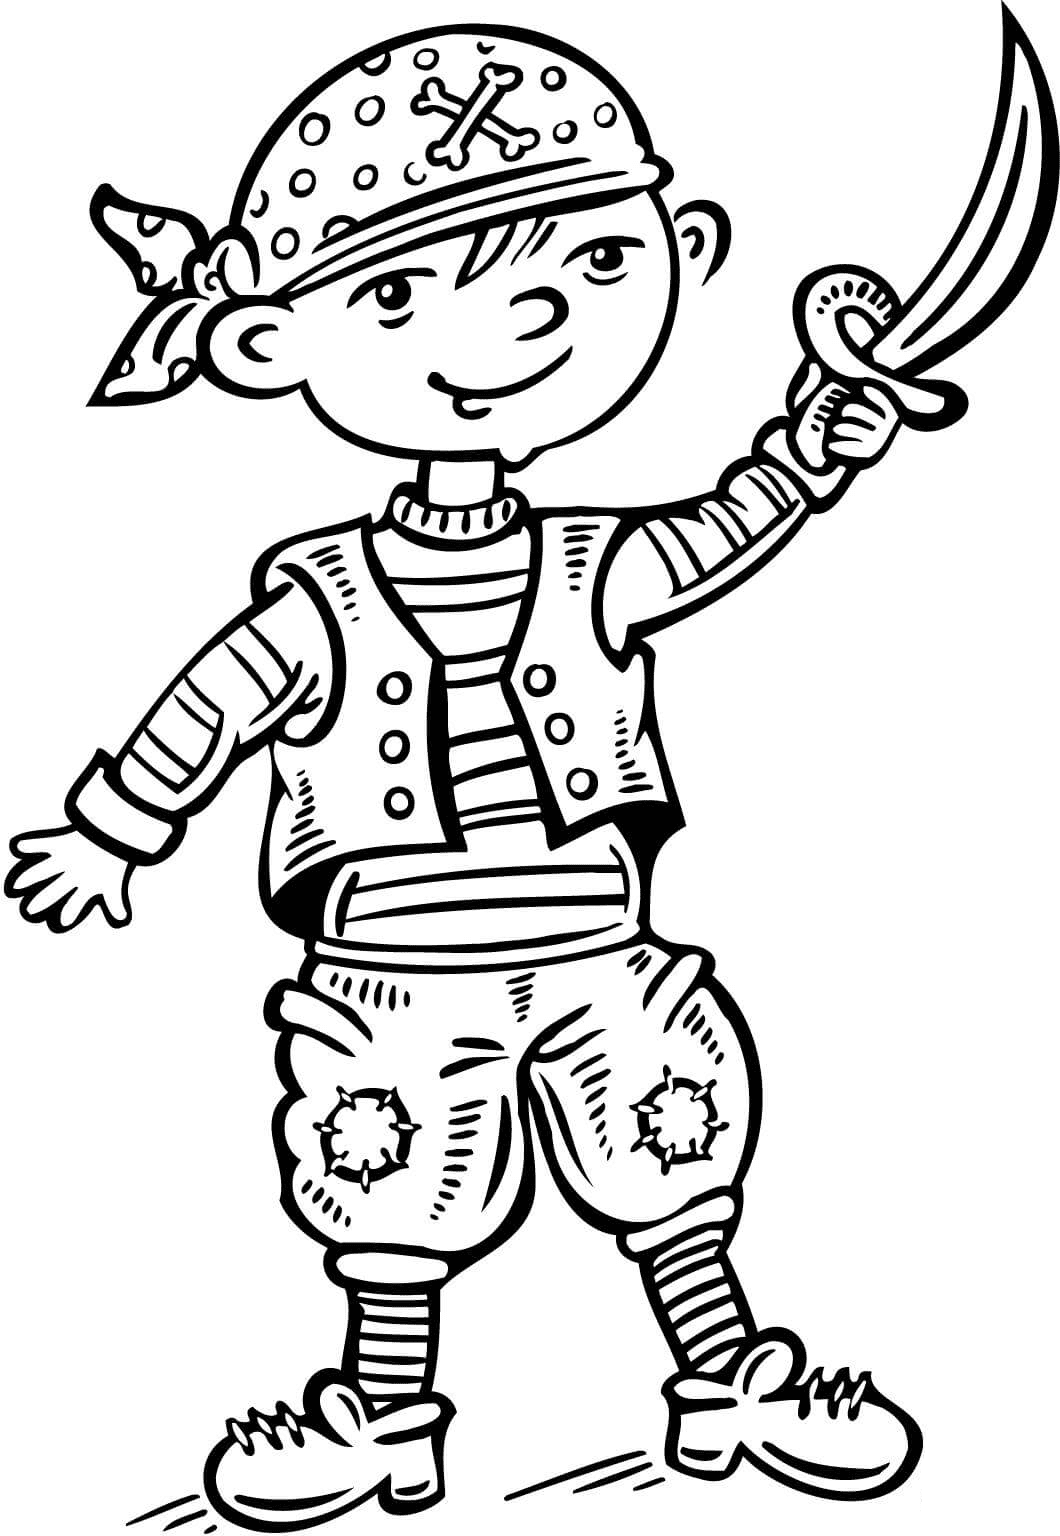 Child Dressed up like a Pirate Coloring Pages